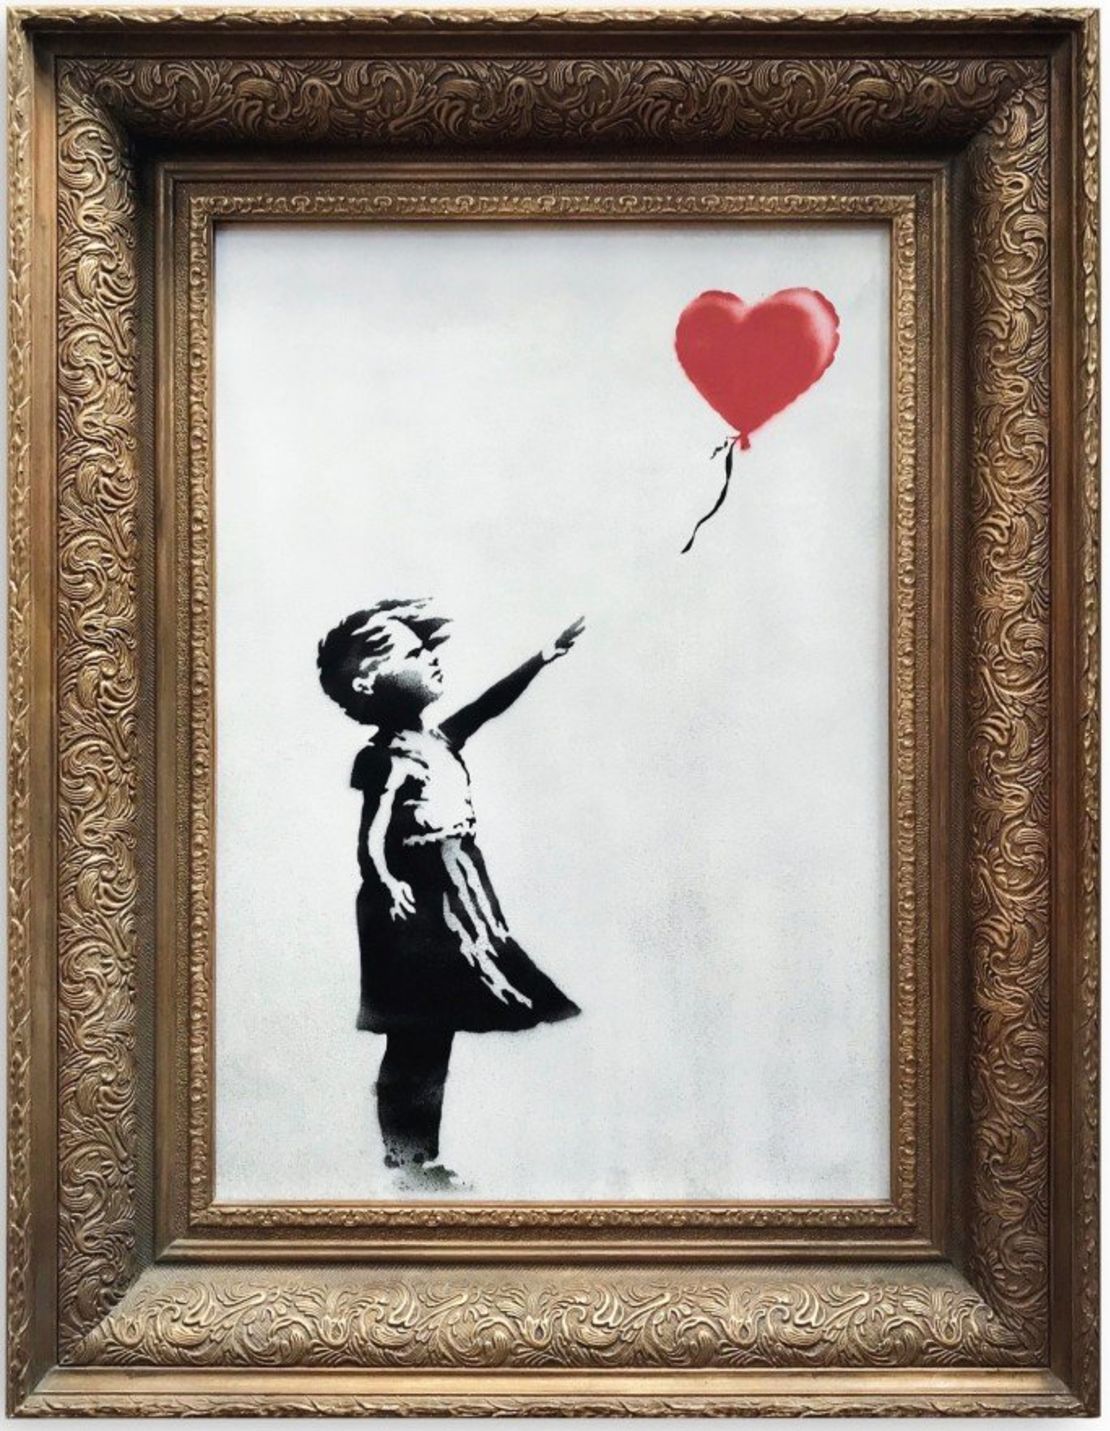 An image of Banksy's Girl with Red Balloon painting that self-destructed just moments after being sold in London.